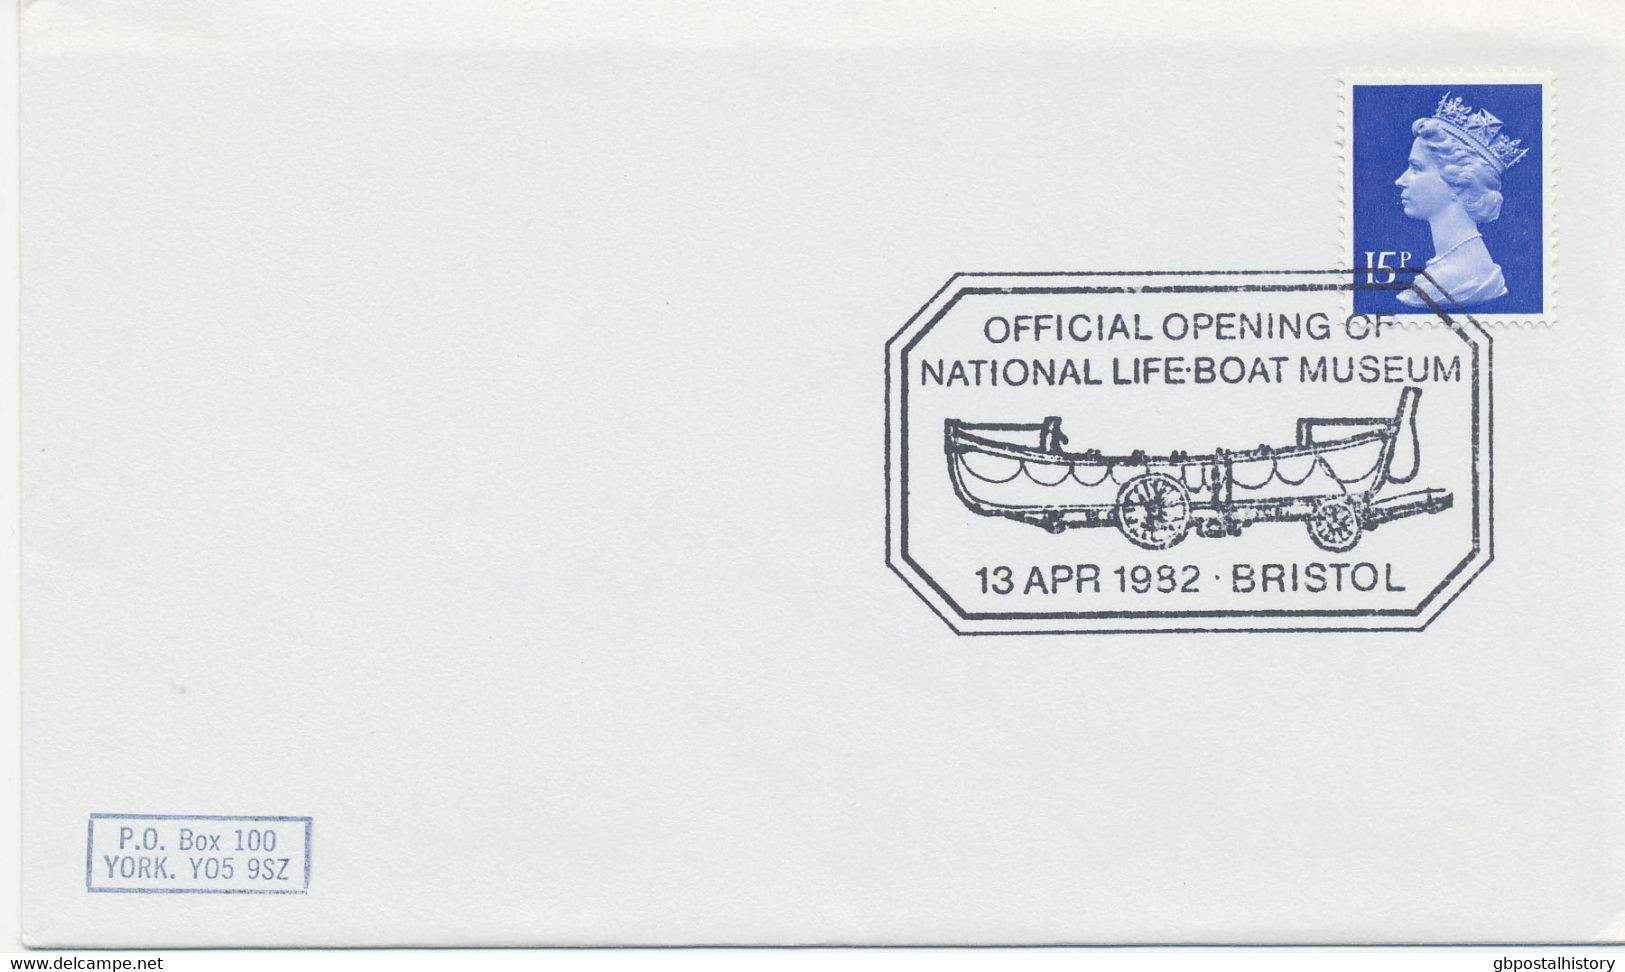 GB SPECIAL EVENT POSTMARKS OFFICIAL OPENING OF NATIONAL LIFE-BOAT MUSEUM 13 APR 1982 - BRISTOL - Postmark Collection